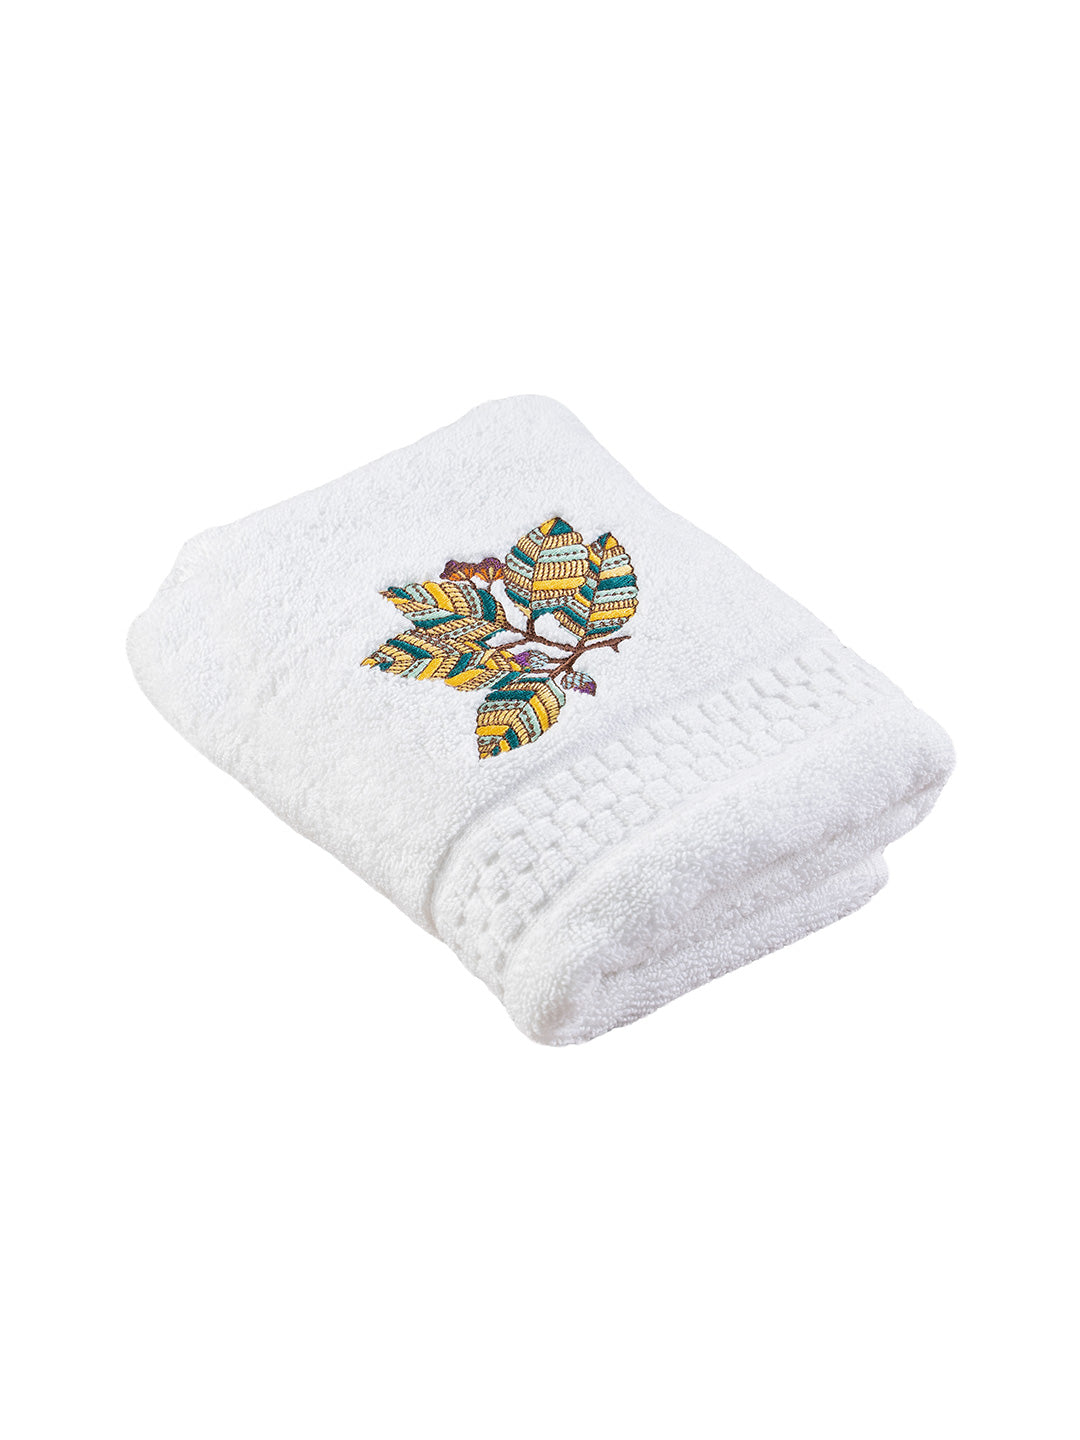 Hand Towels - Floral Embroidered